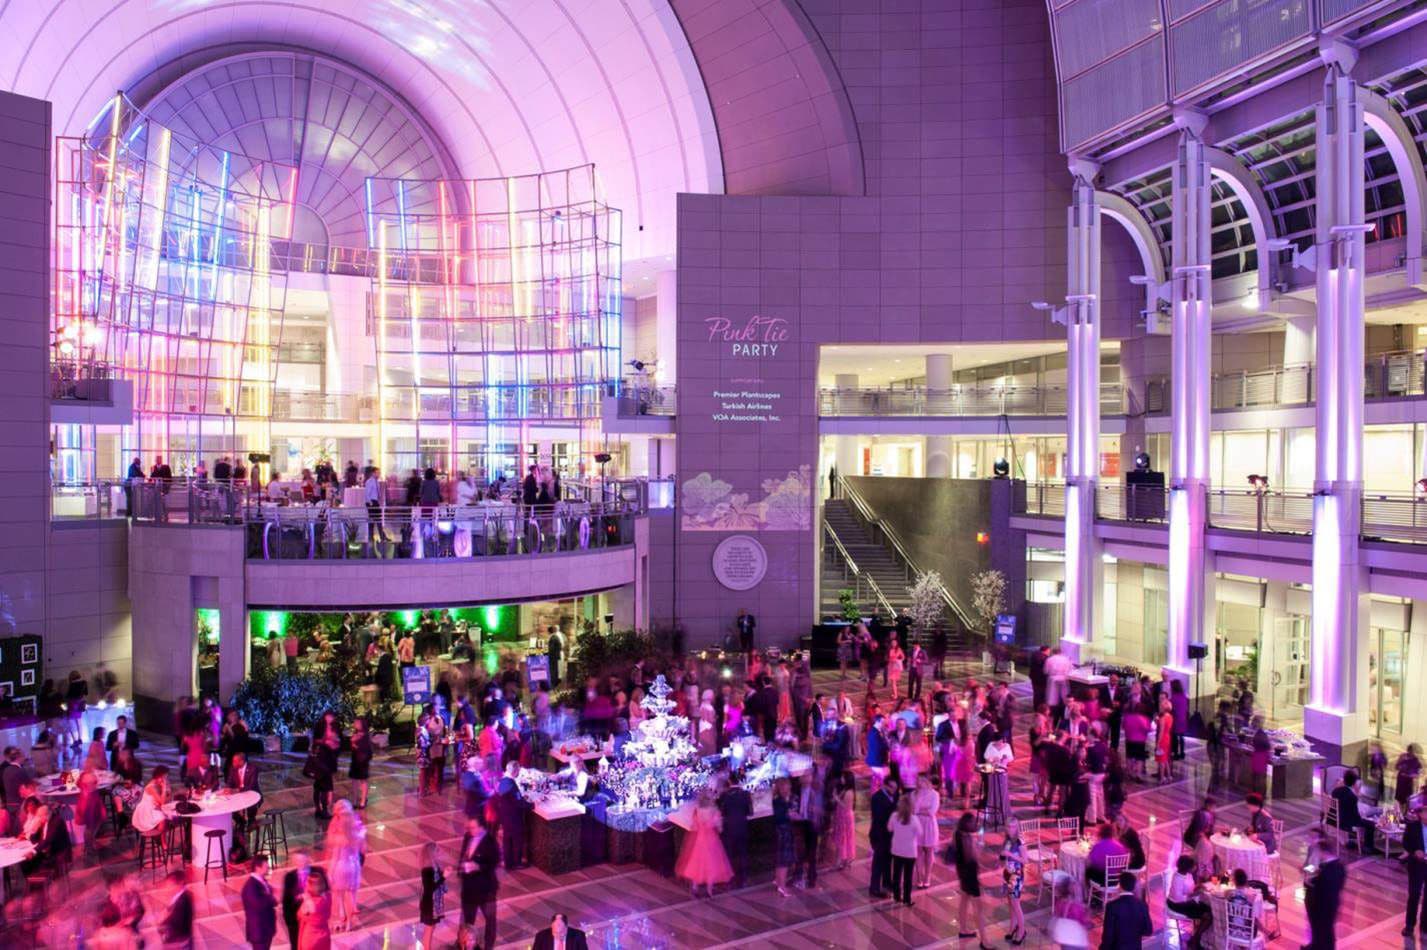 The Pink Tie Party will be
7–11 p.m. Thursday, March 15, at the Ronald Reagan Building and International Trade Center. (Courtesy National Cherry Blossom Festival)